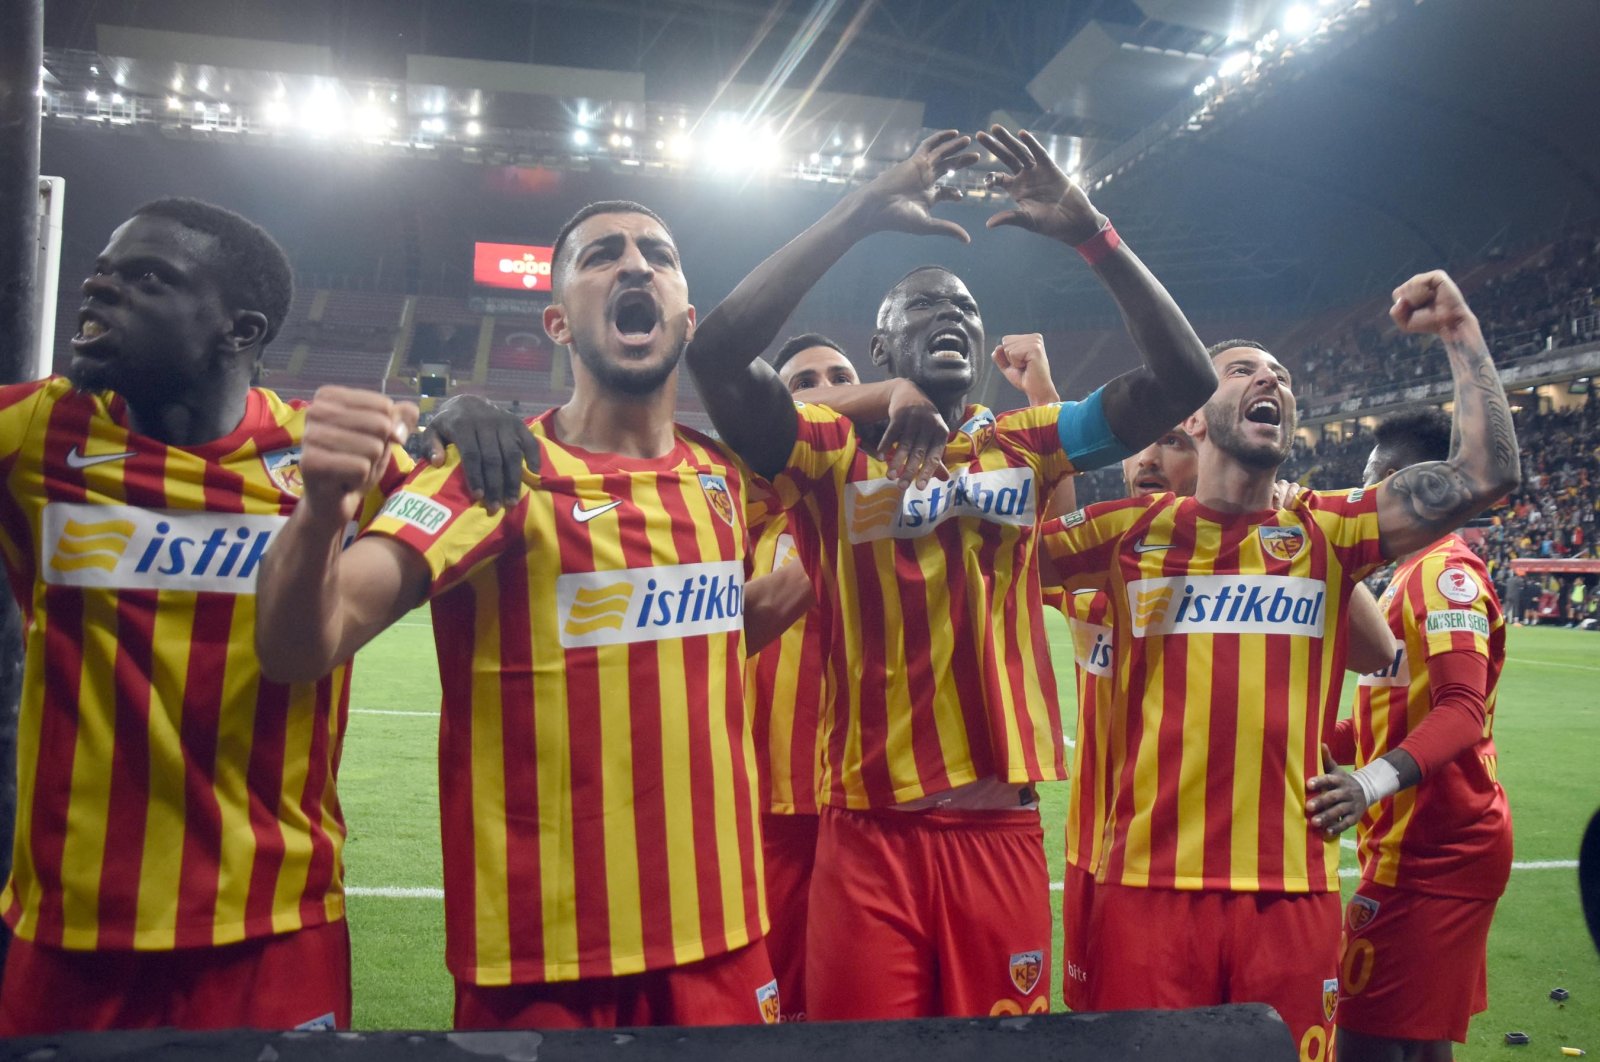 Kayserispor players celebrate a goal in a Turkish Cup match against Trabzonspor, Kayseri, Turkey, May 10, 2022. (DHA Photo)